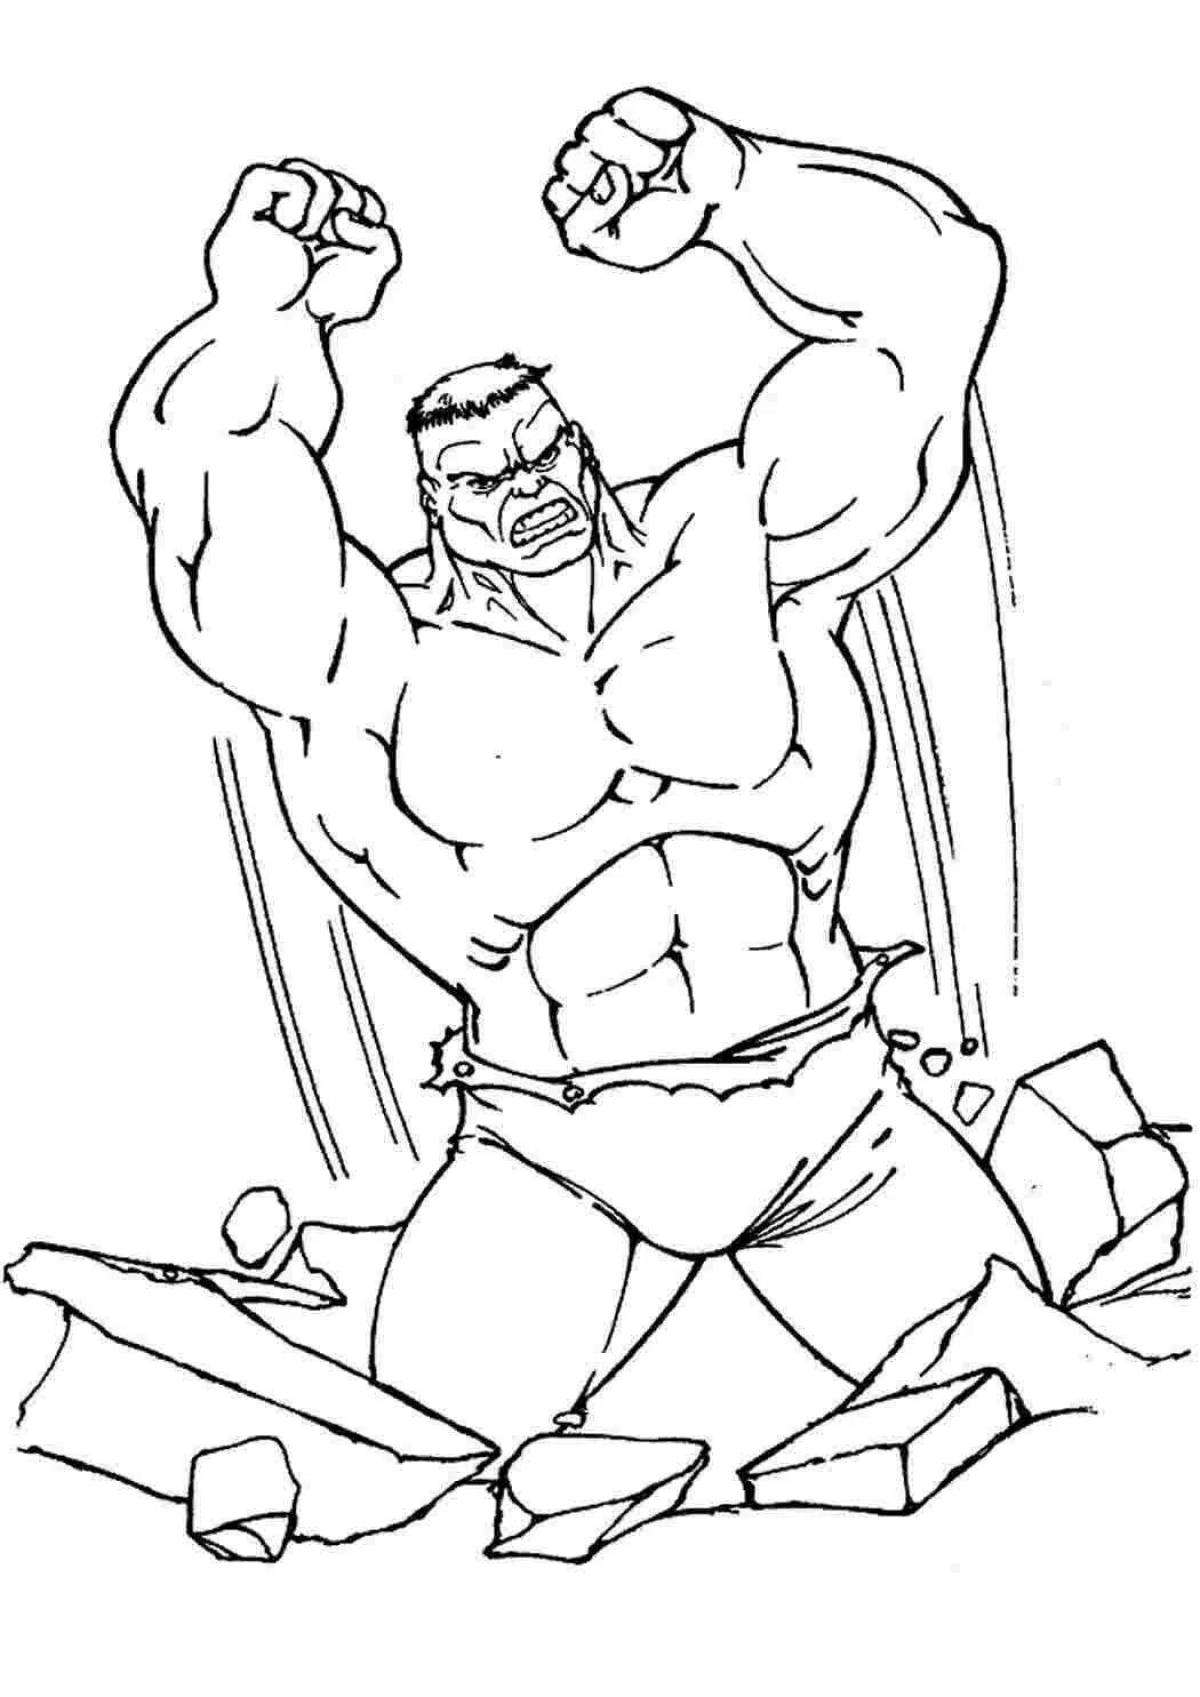 Powerful hulk coloring book for boys